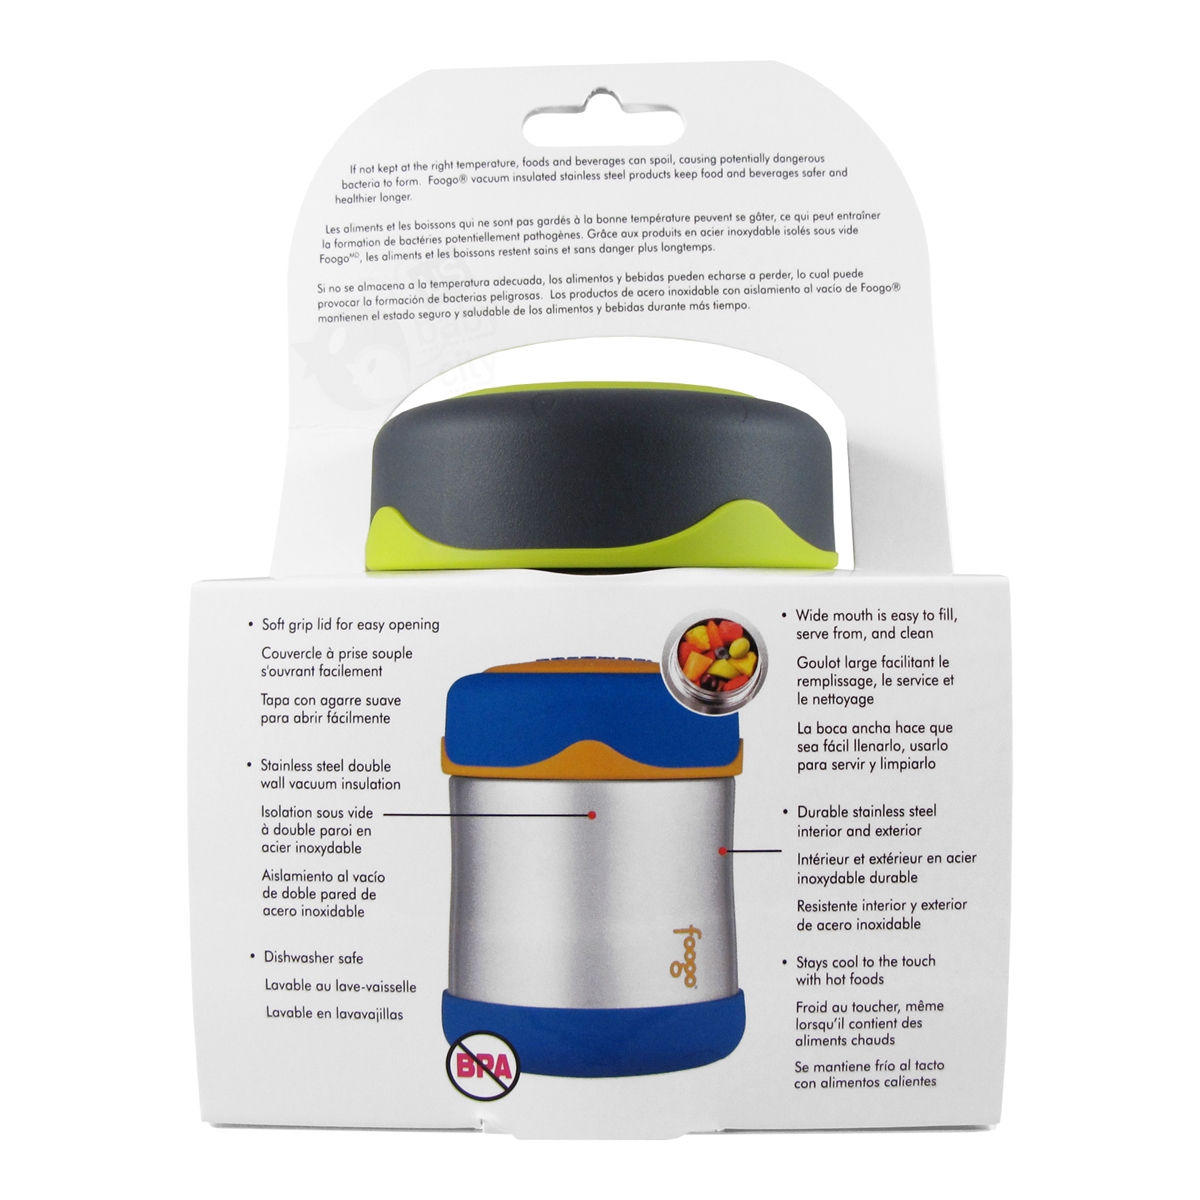 Thermos® Food Jar in Stock - ULINE